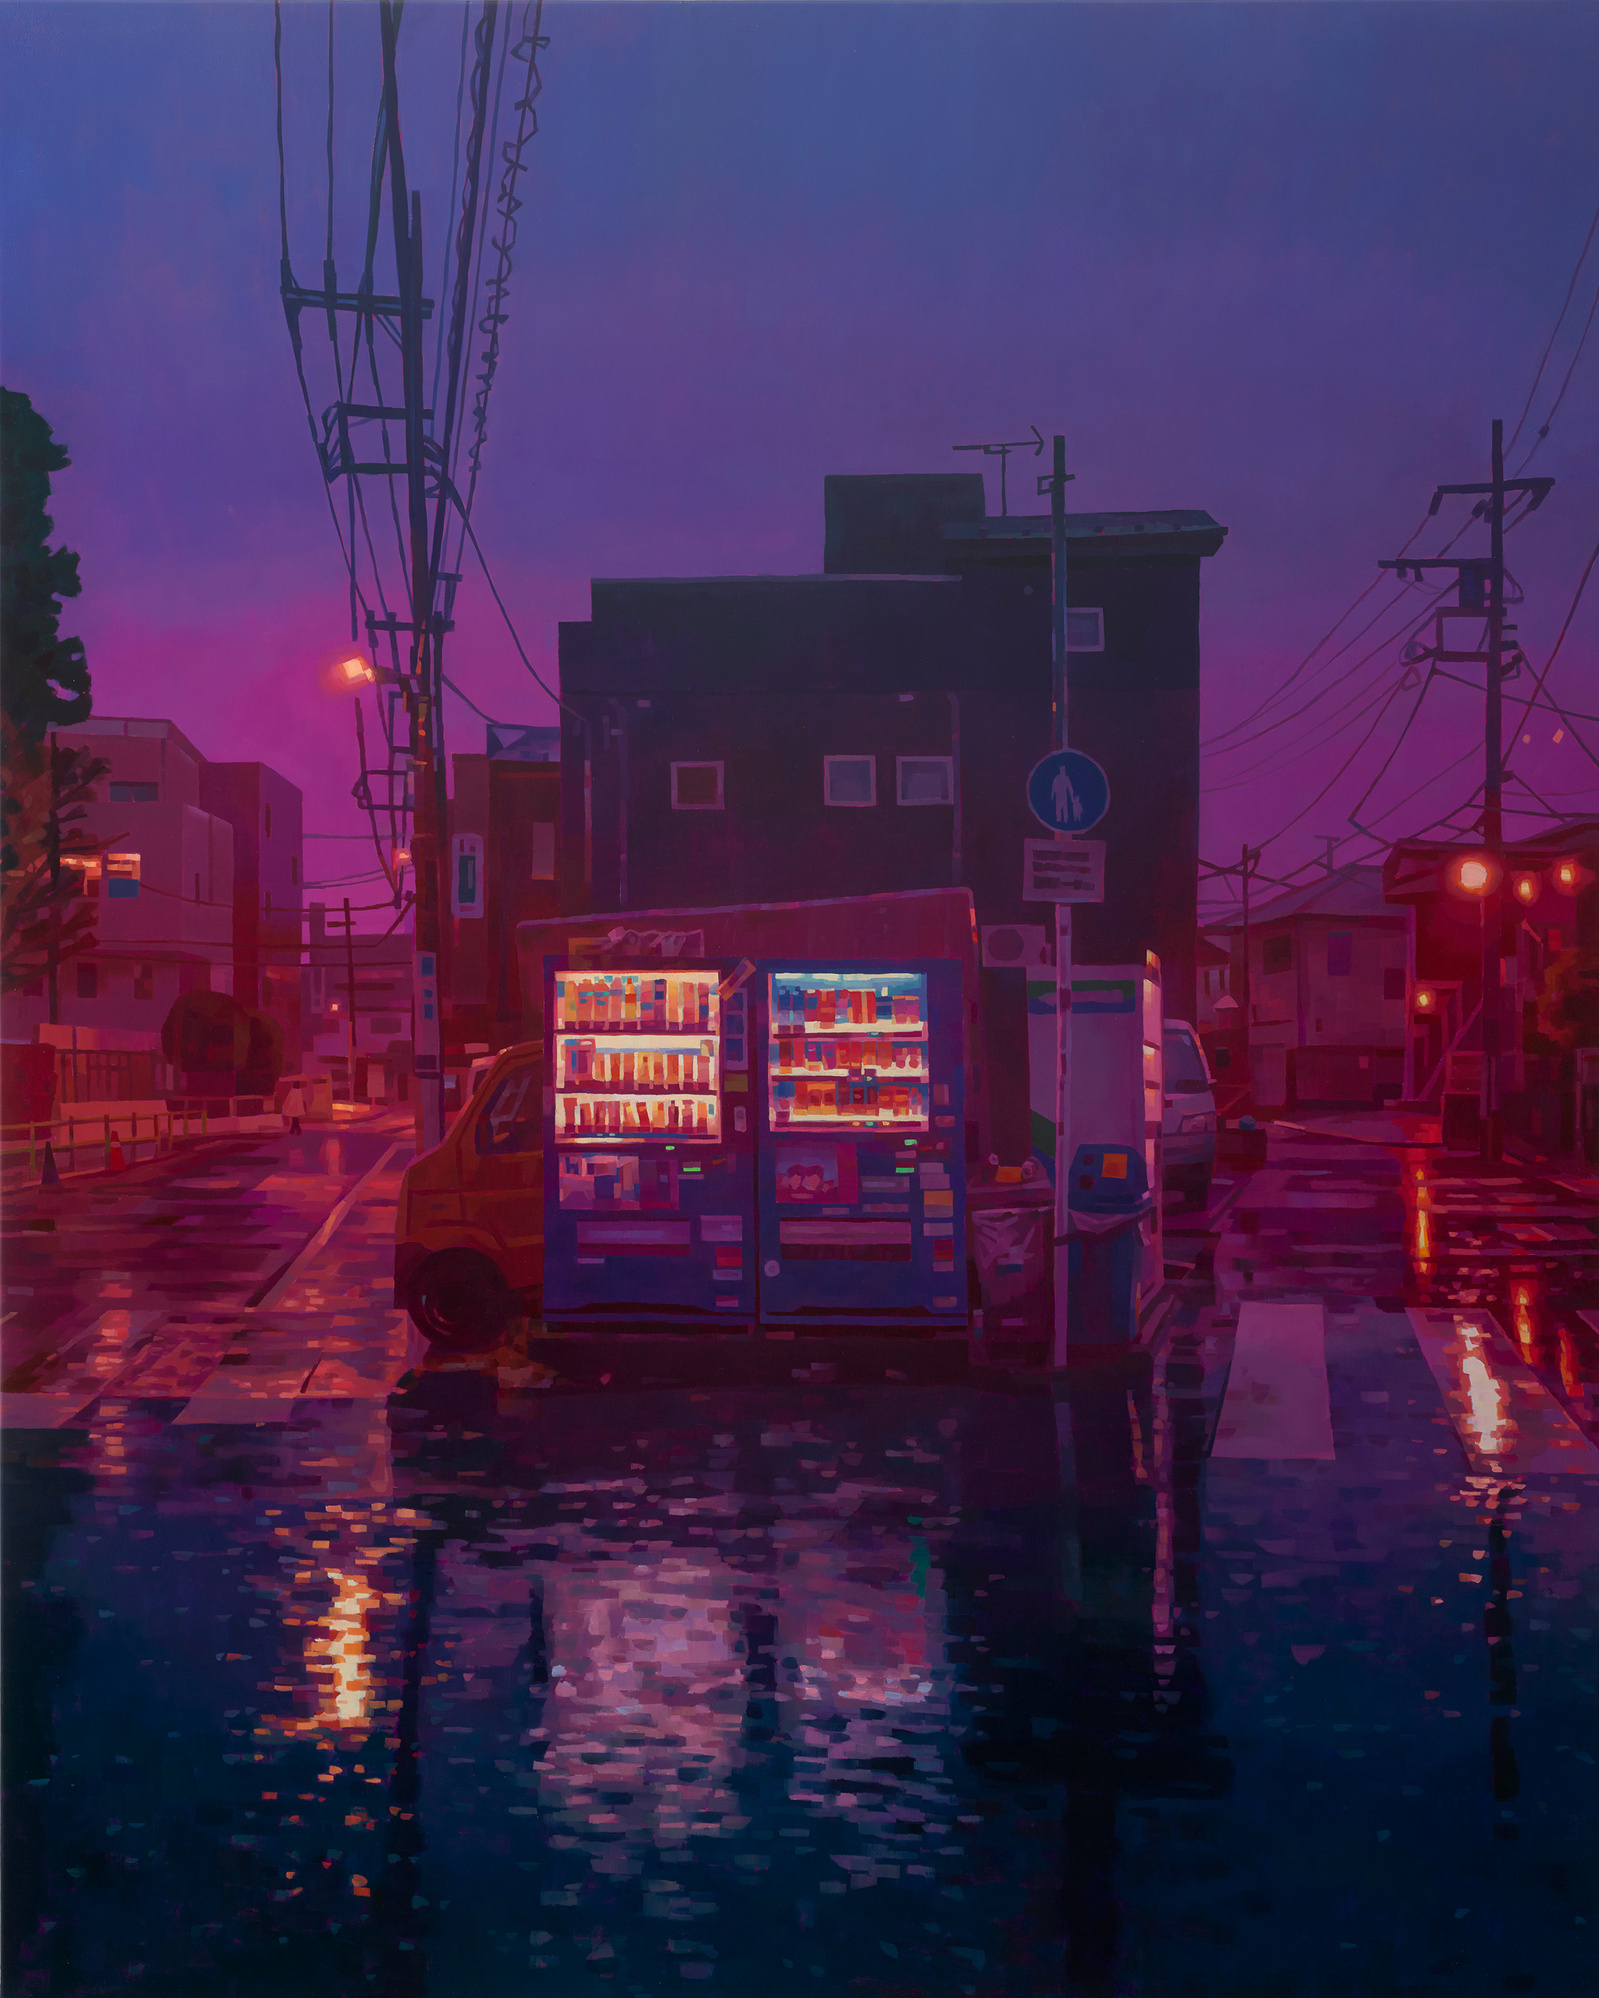 A Morimoto painting of a street scene at dust, with a street wet from rain, and a food or snack truck facing the viewer. The painting ist mostly in pink and purple tones